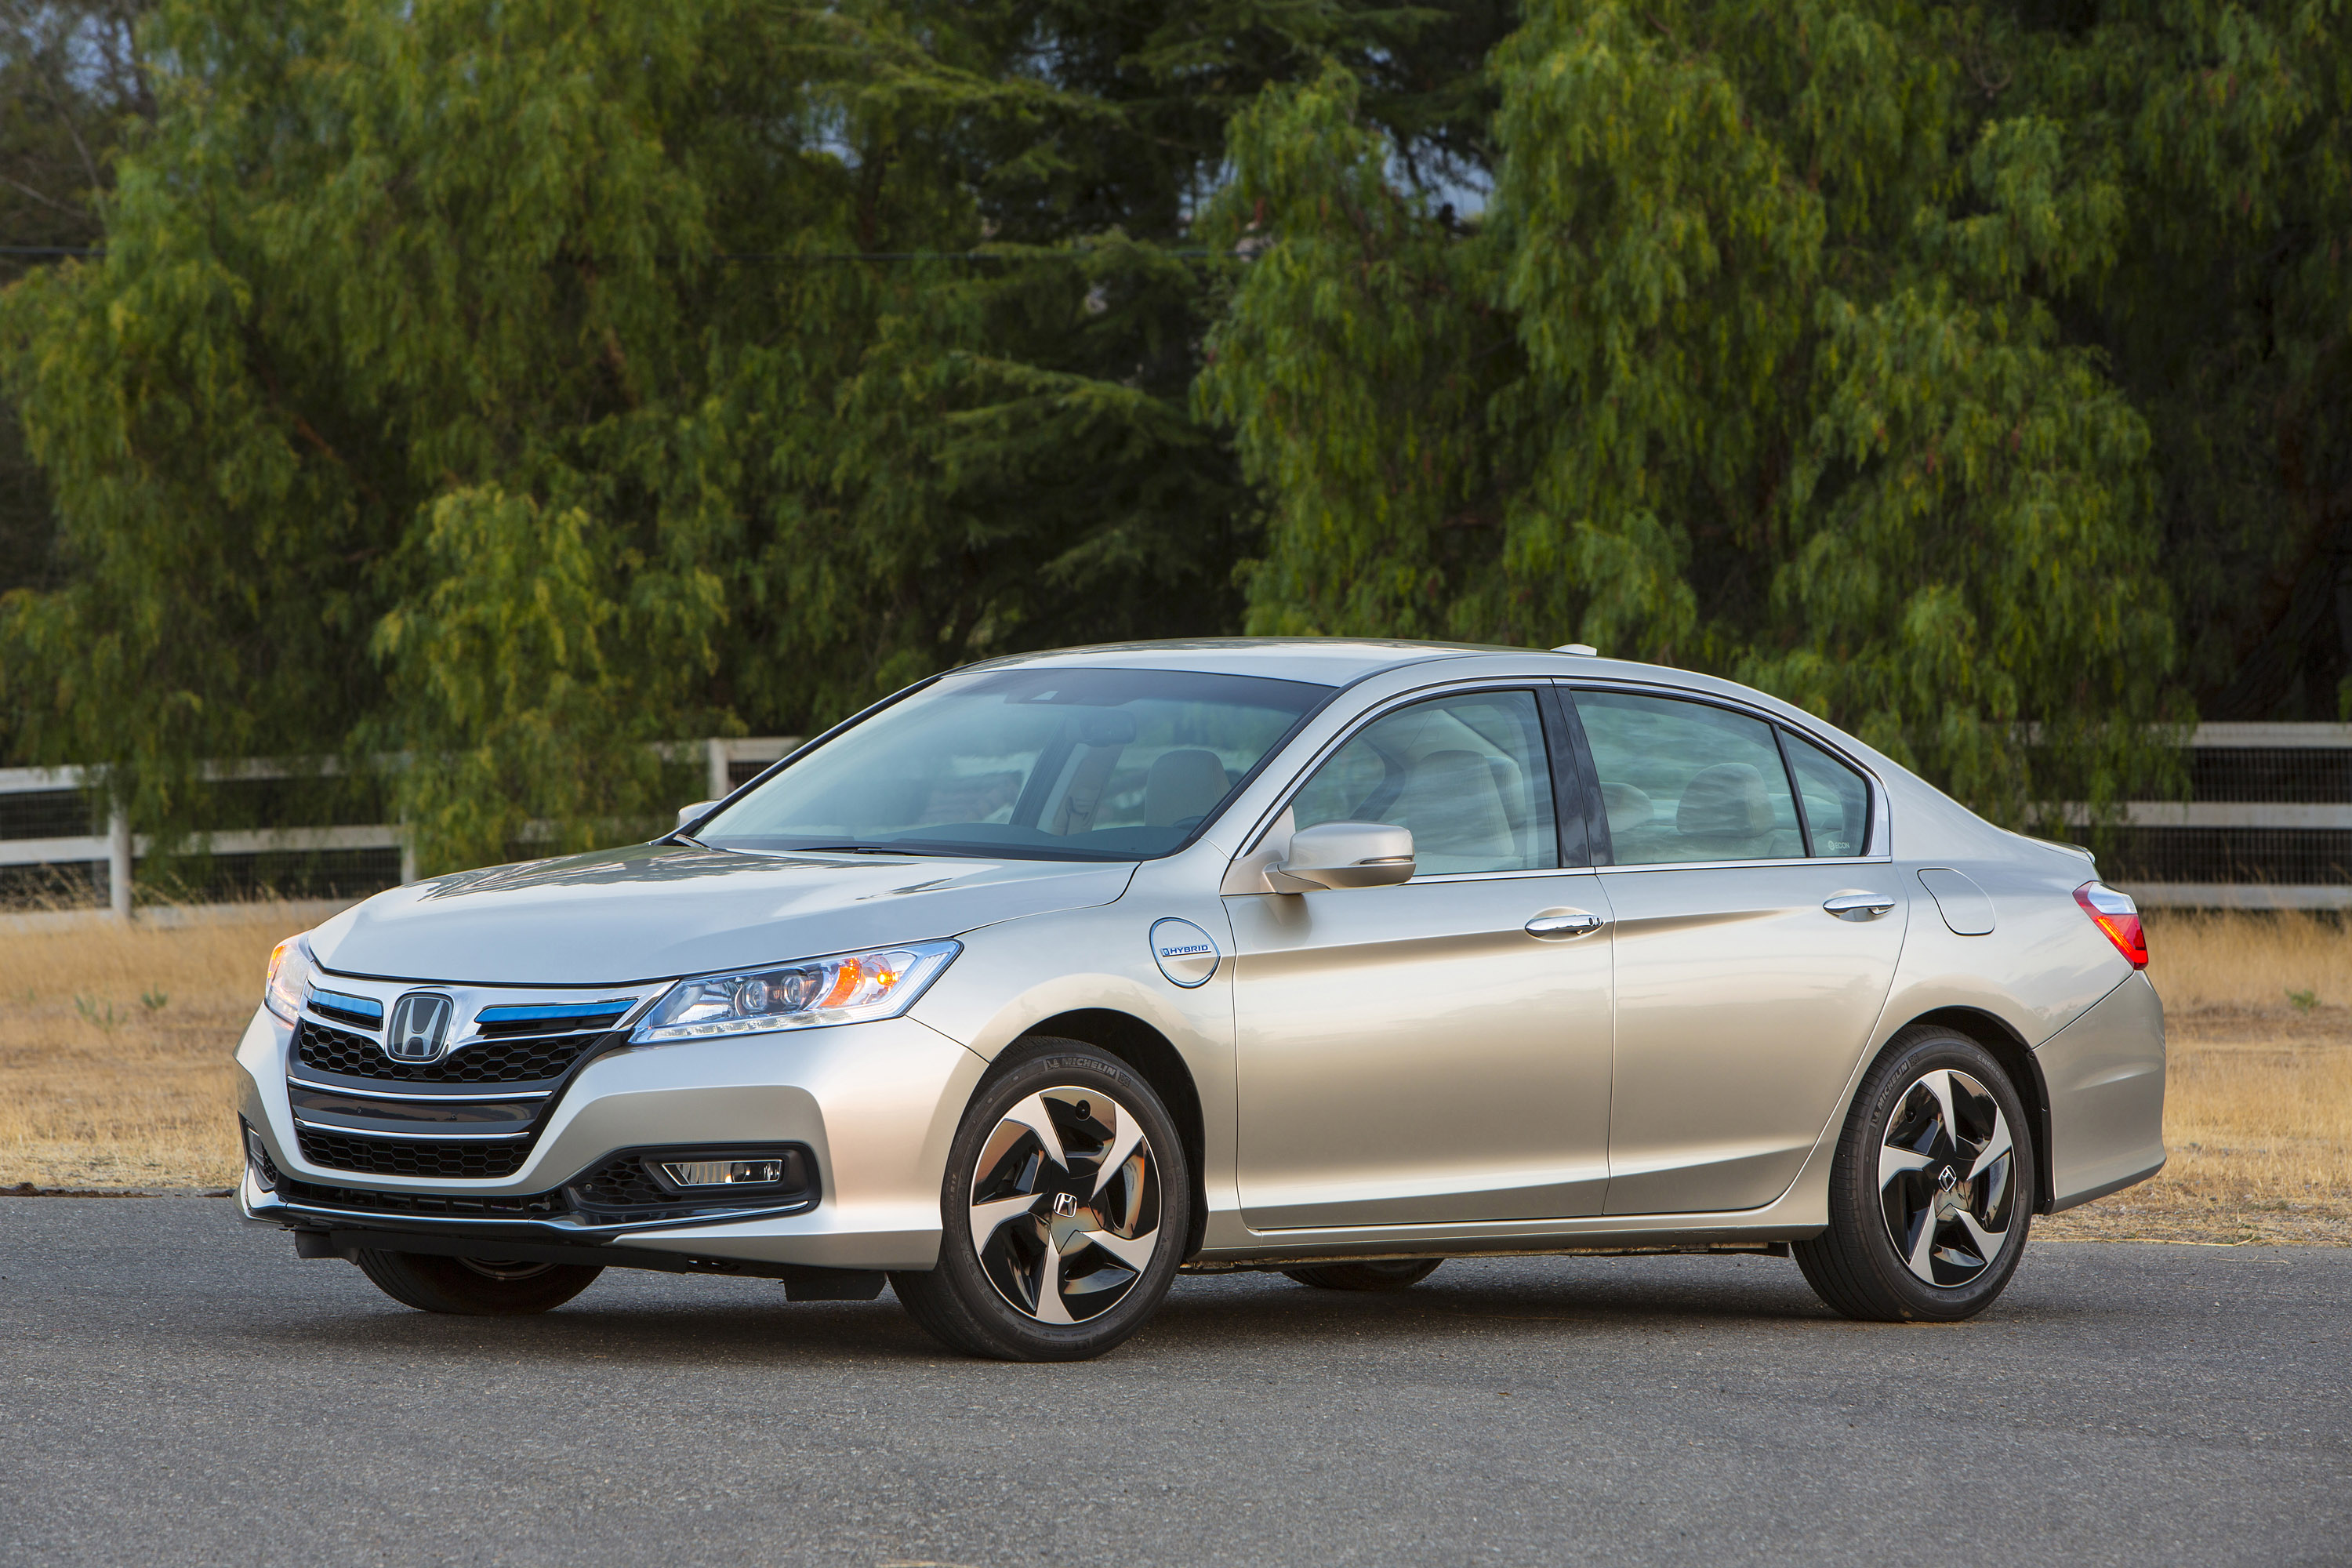 2014 Honda Accord Phev Hd Pictures